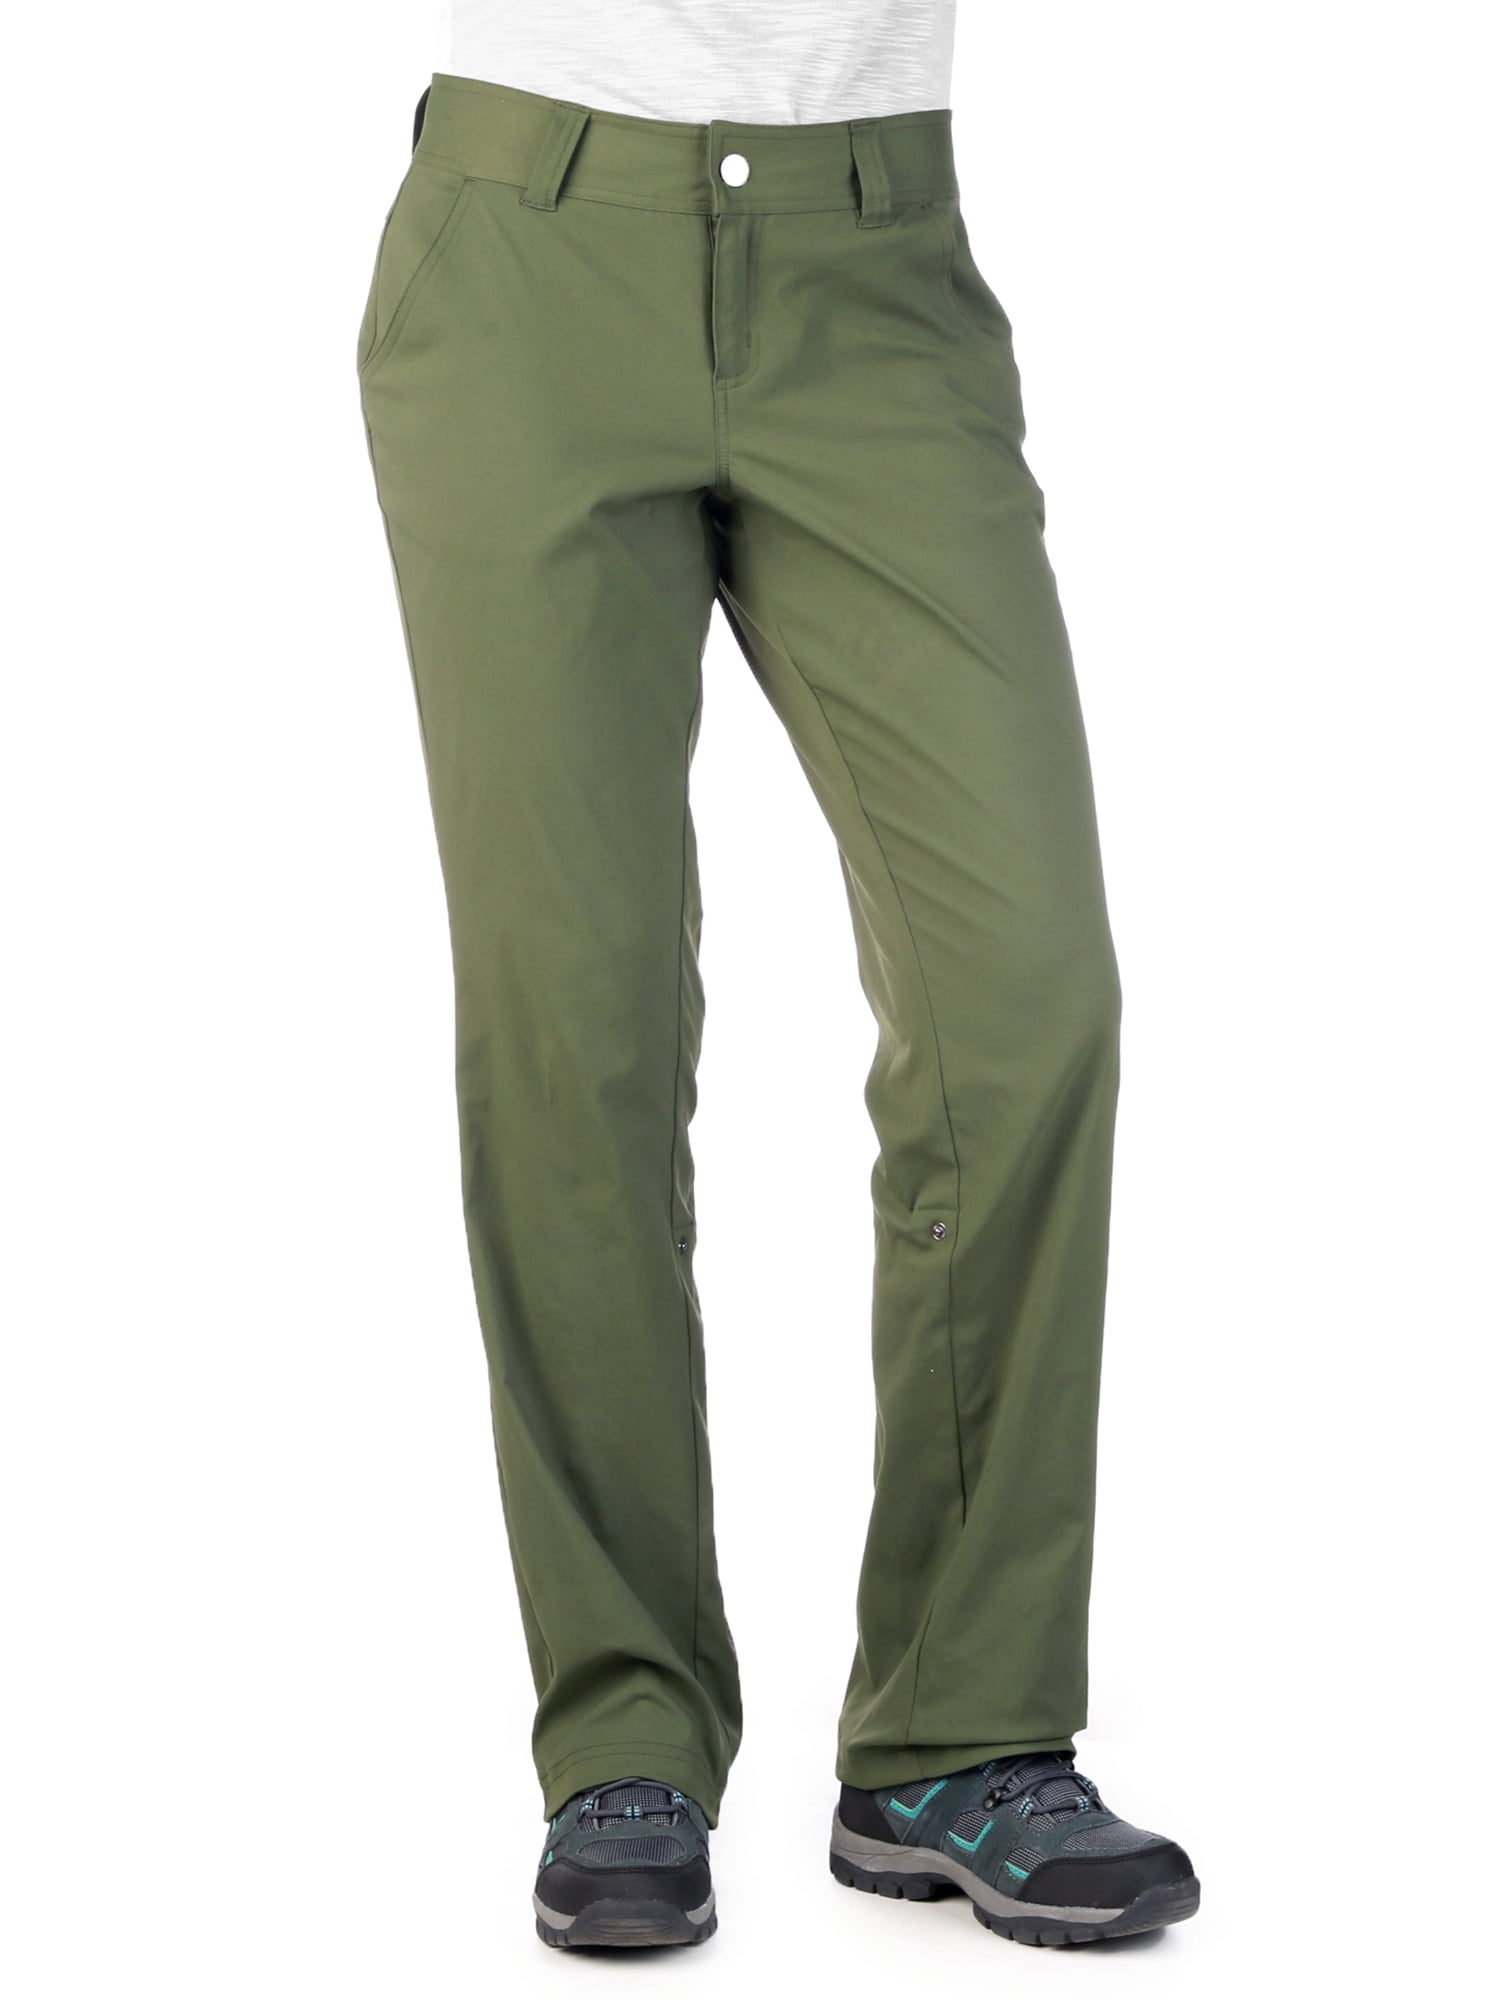 All Forth Women's Roll Up Outdoors & Hiking Pants w/ Pockets - Walmart.com